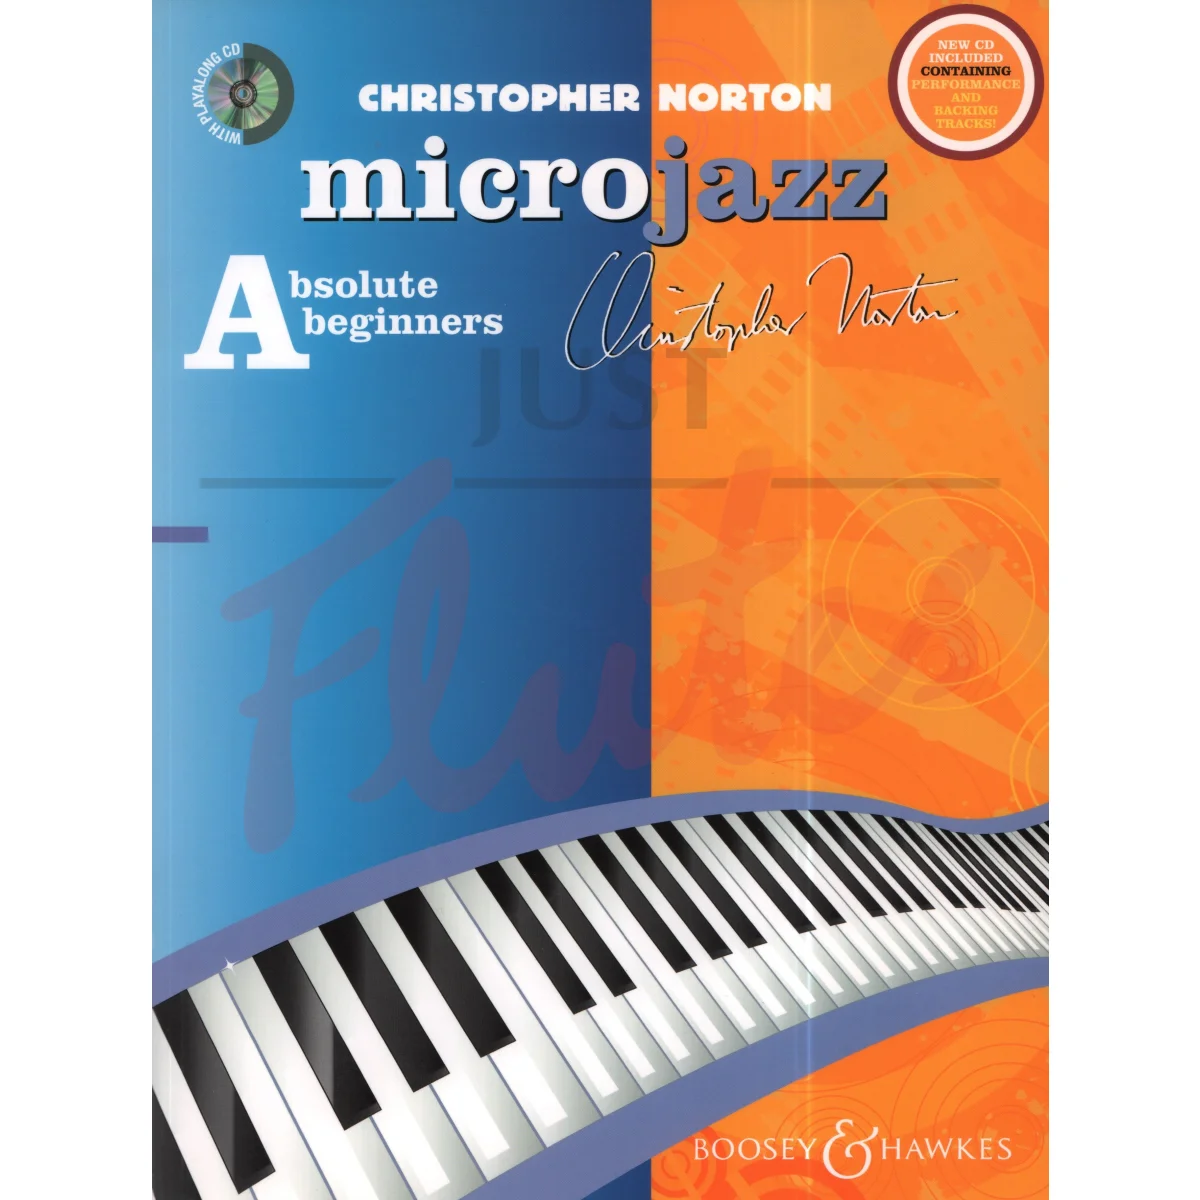 Microjazz for Absolute Beginners for Piano